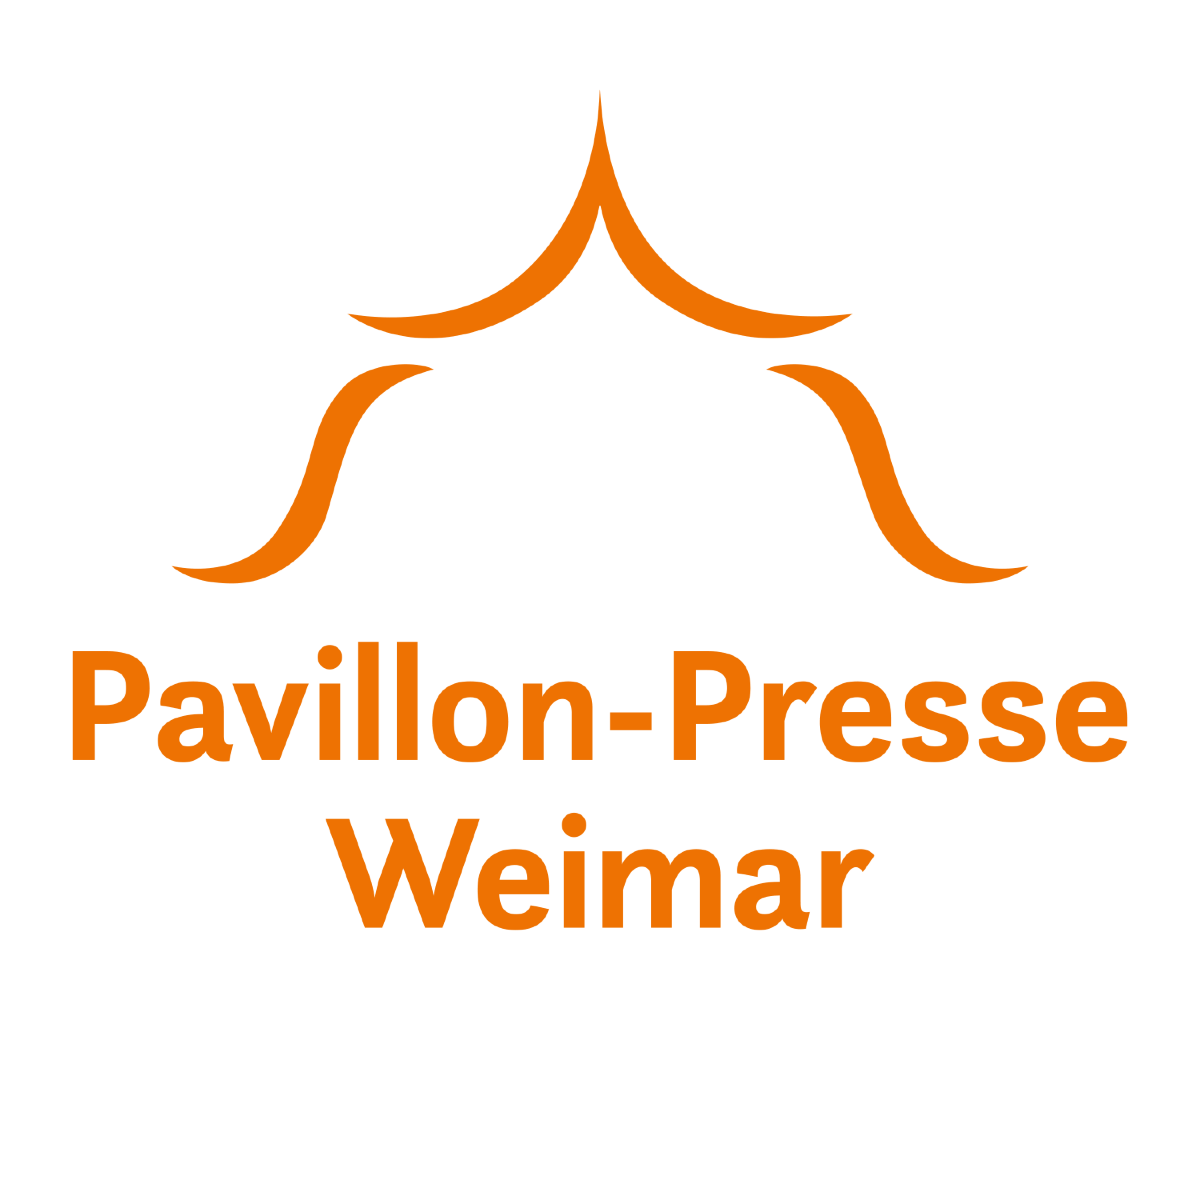 More information about "Pavillon-Presse Weimar"